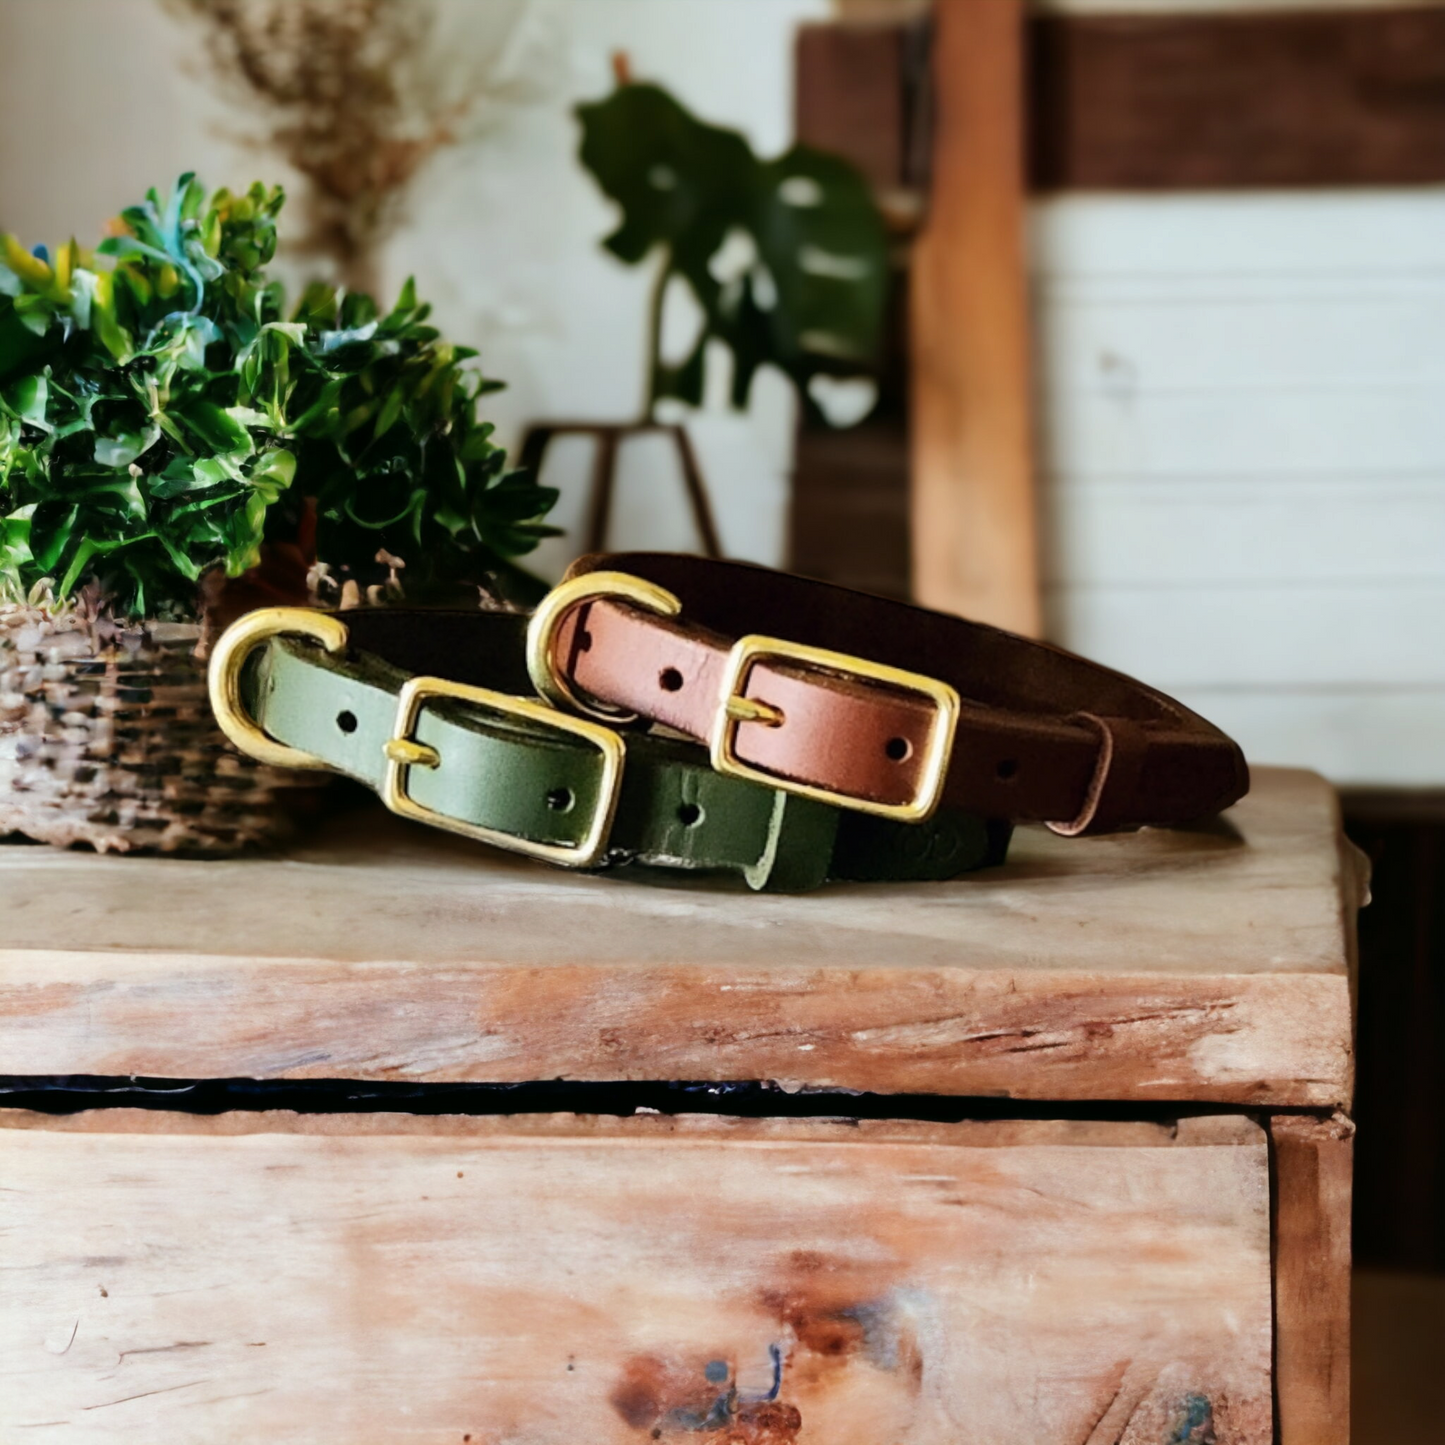 Country style dog collars with rectangle buckle